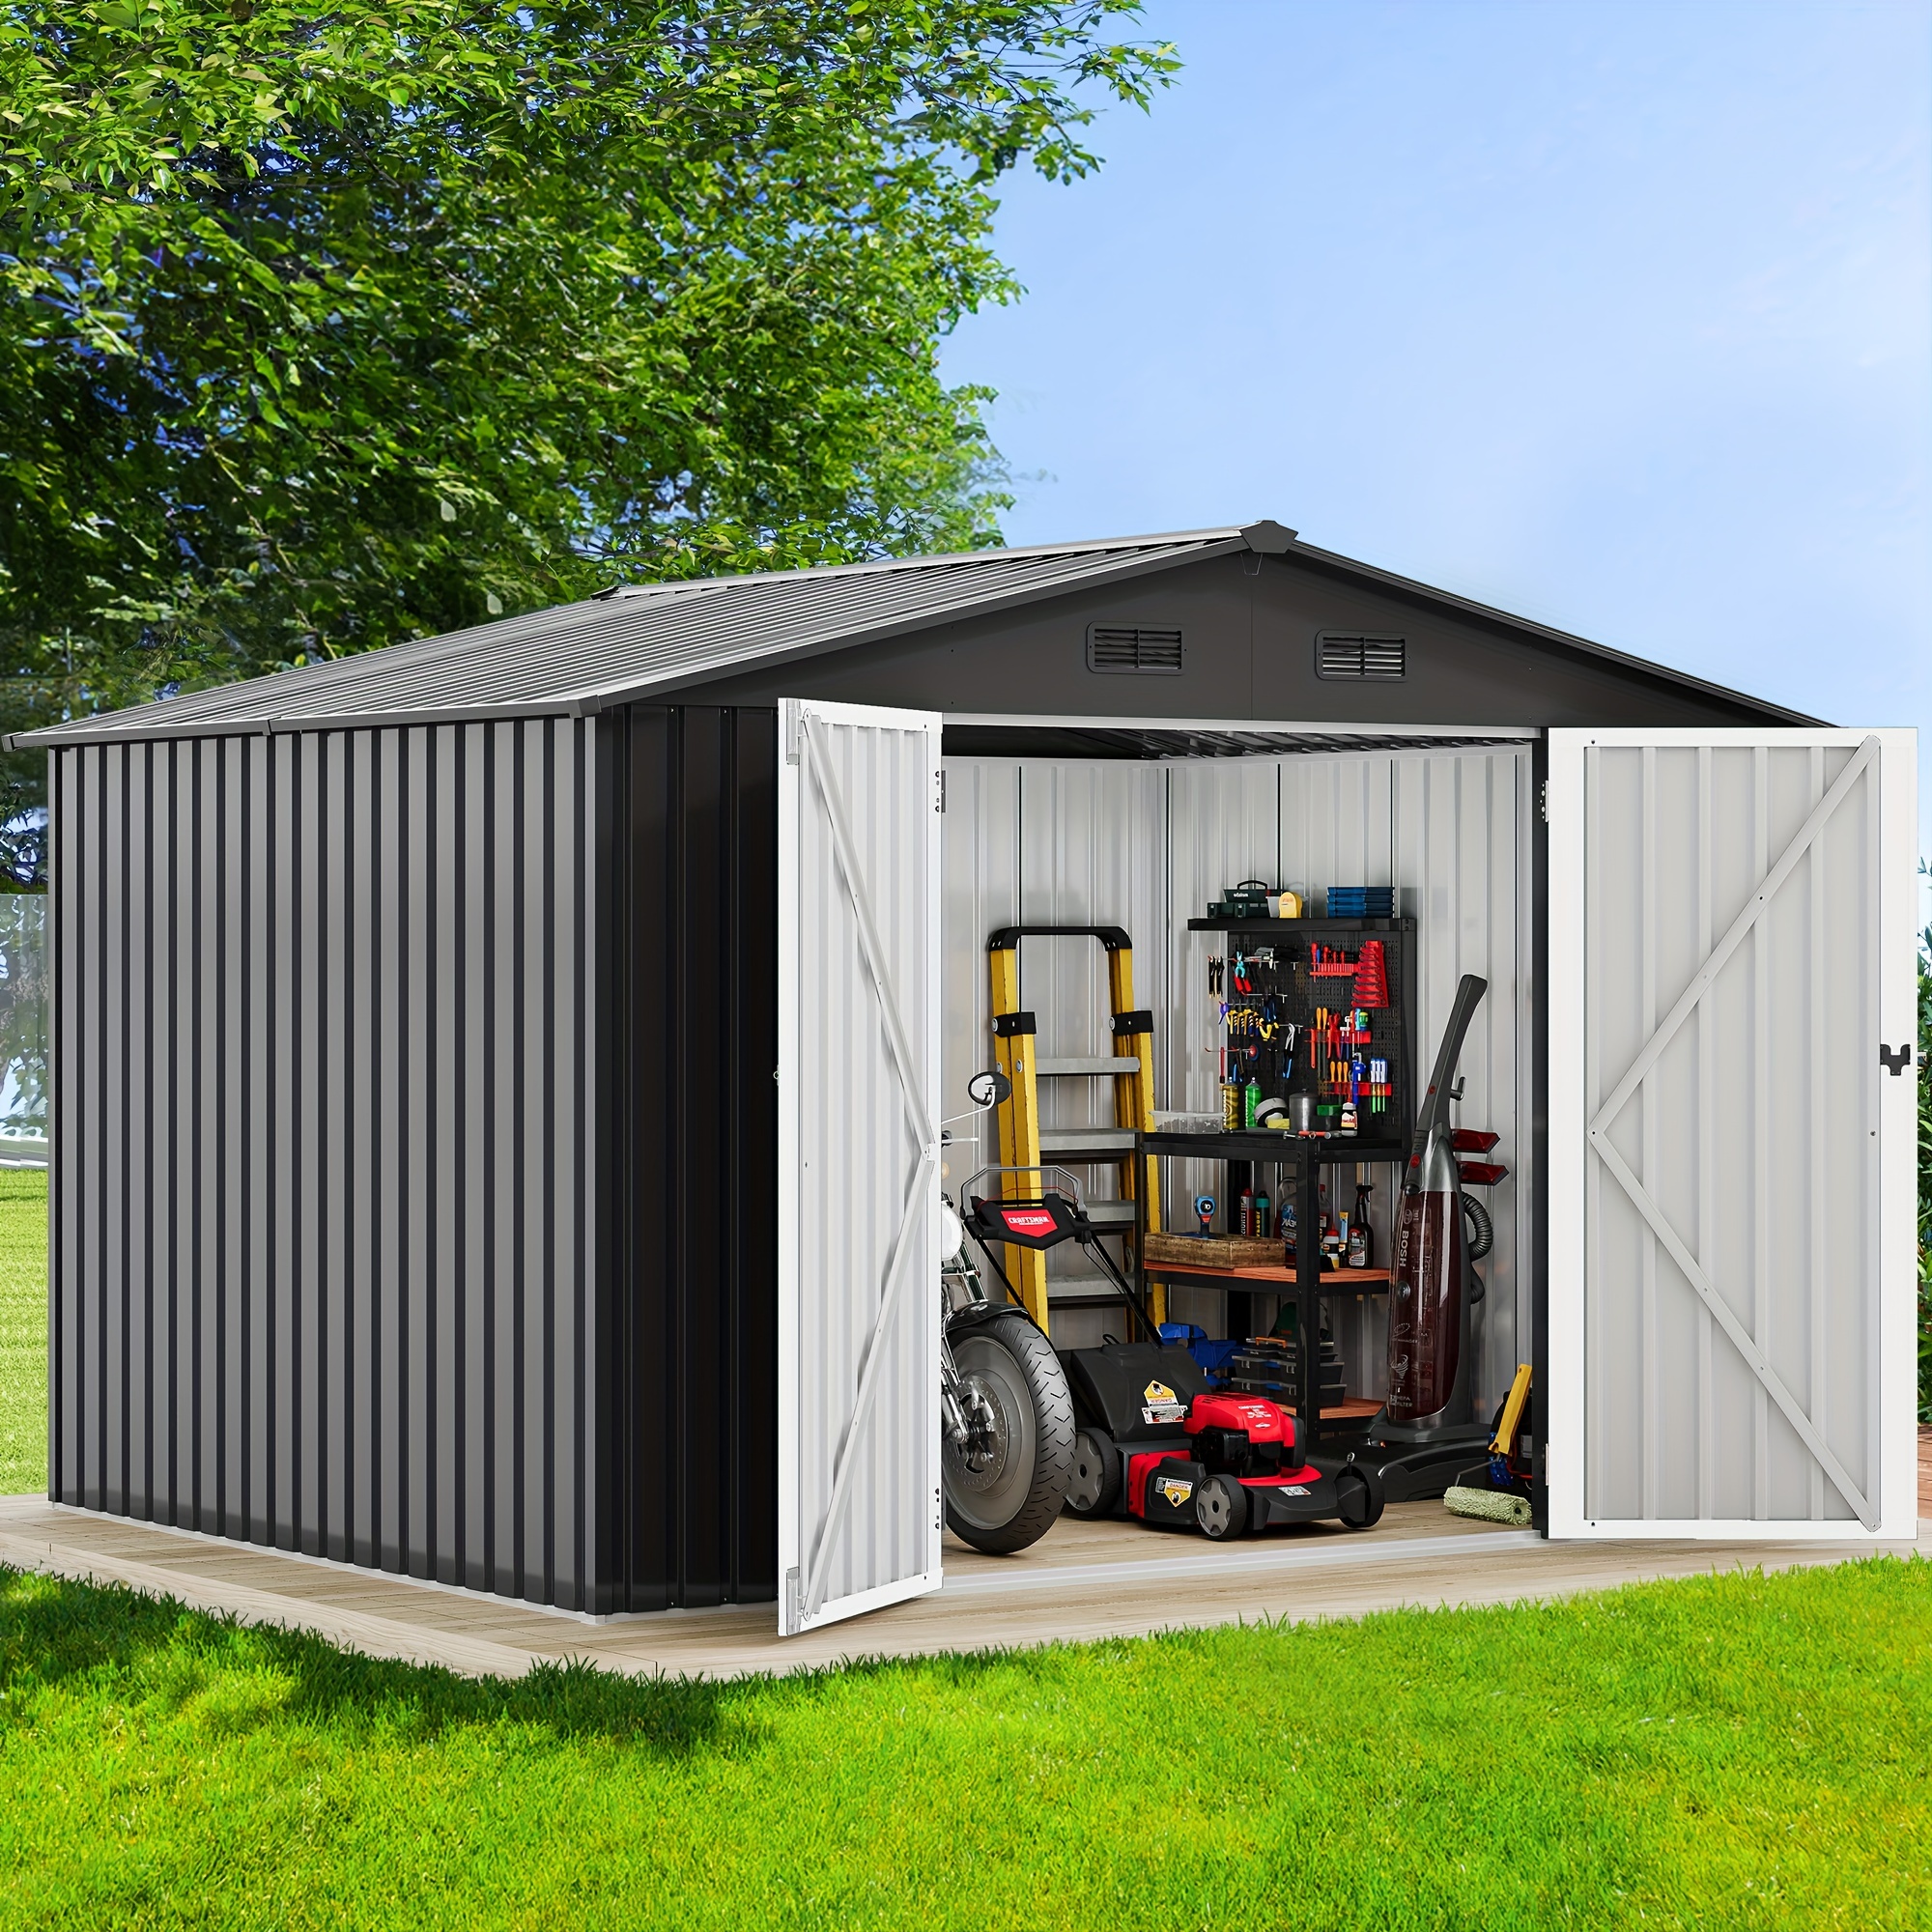 

Balconera 10x8ft Large Metal Outdoor Storage Shed, Heavy Duty Tool Storage Sheds House With Lockable Doors & Air Vent For Backyard Patio Lawn To Store Bikes, Garden Tools, Lawnmowers